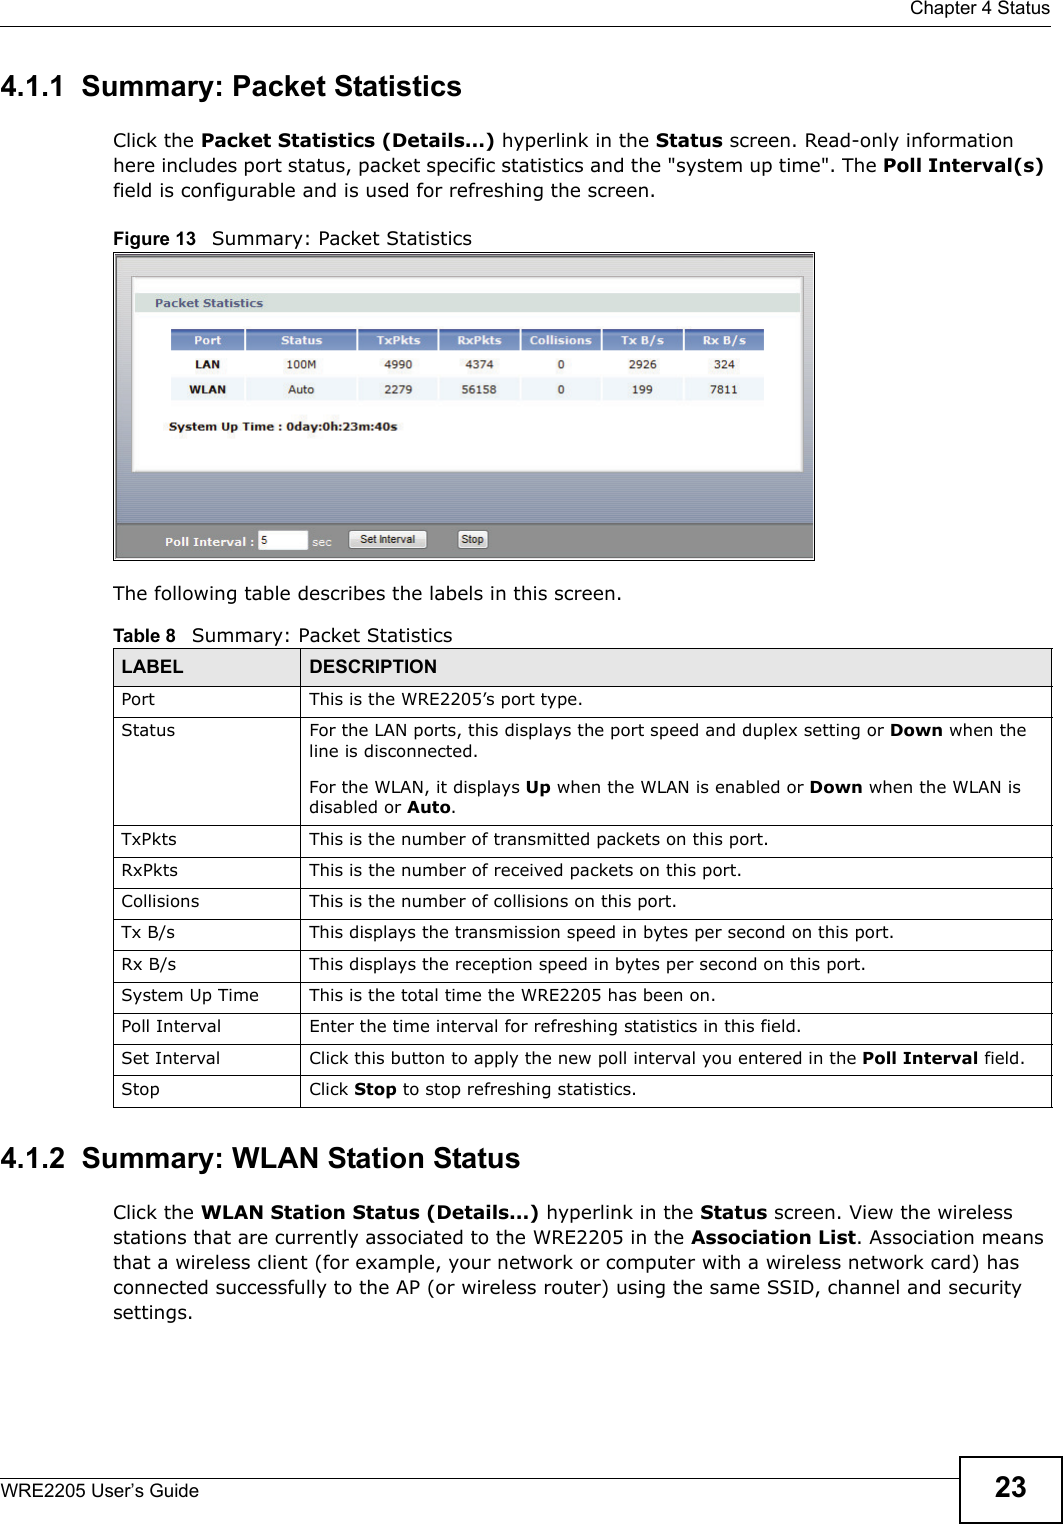  Chapter 4 StatusWRE2205 User’s Guide 234.1.1  Summary: Packet Statistics Click the Packet Statistics (Details...) hyperlink in the Status screen. Read-only information here includes port status, packet specific statistics and the &quot;system up time&quot;. The Poll Interval(s) field is configurable and is used for refreshing the screen.Figure 13   Summary: Packet Statistics The following table describes the labels in this screen.4.1.2  Summary: WLAN Station Status     Click the WLAN Station Status (Details...) hyperlink in the Status screen. View the wireless stations that are currently associated to the WRE2205 in the Association List. Association means that a wireless client (for example, your network or computer with a wireless network card) has connected successfully to the AP (or wireless router) using the same SSID, channel and security settings.Table 8   Summary: Packet StatisticsLABEL DESCRIPTIONPort This is the WRE2205’s port type.Status  For the LAN ports, this displays the port speed and duplex setting or Down when the line is disconnected.For the WLAN, it displays Up when the WLAN is enabled or Down when the WLAN is disabled or Auto.TxPkts  This is the number of transmitted packets on this port.RxPkts  This is the number of received packets on this port.Collisions  This is the number of collisions on this port.Tx B/s  This displays the transmission speed in bytes per second on this port.Rx B/s This displays the reception speed in bytes per second on this port.System Up Time This is the total time the WRE2205 has been on.Poll Interval Enter the time interval for refreshing statistics in this field.Set Interval Click this button to apply the new poll interval you entered in the Poll Interval field.Stop Click Stop to stop refreshing statistics.